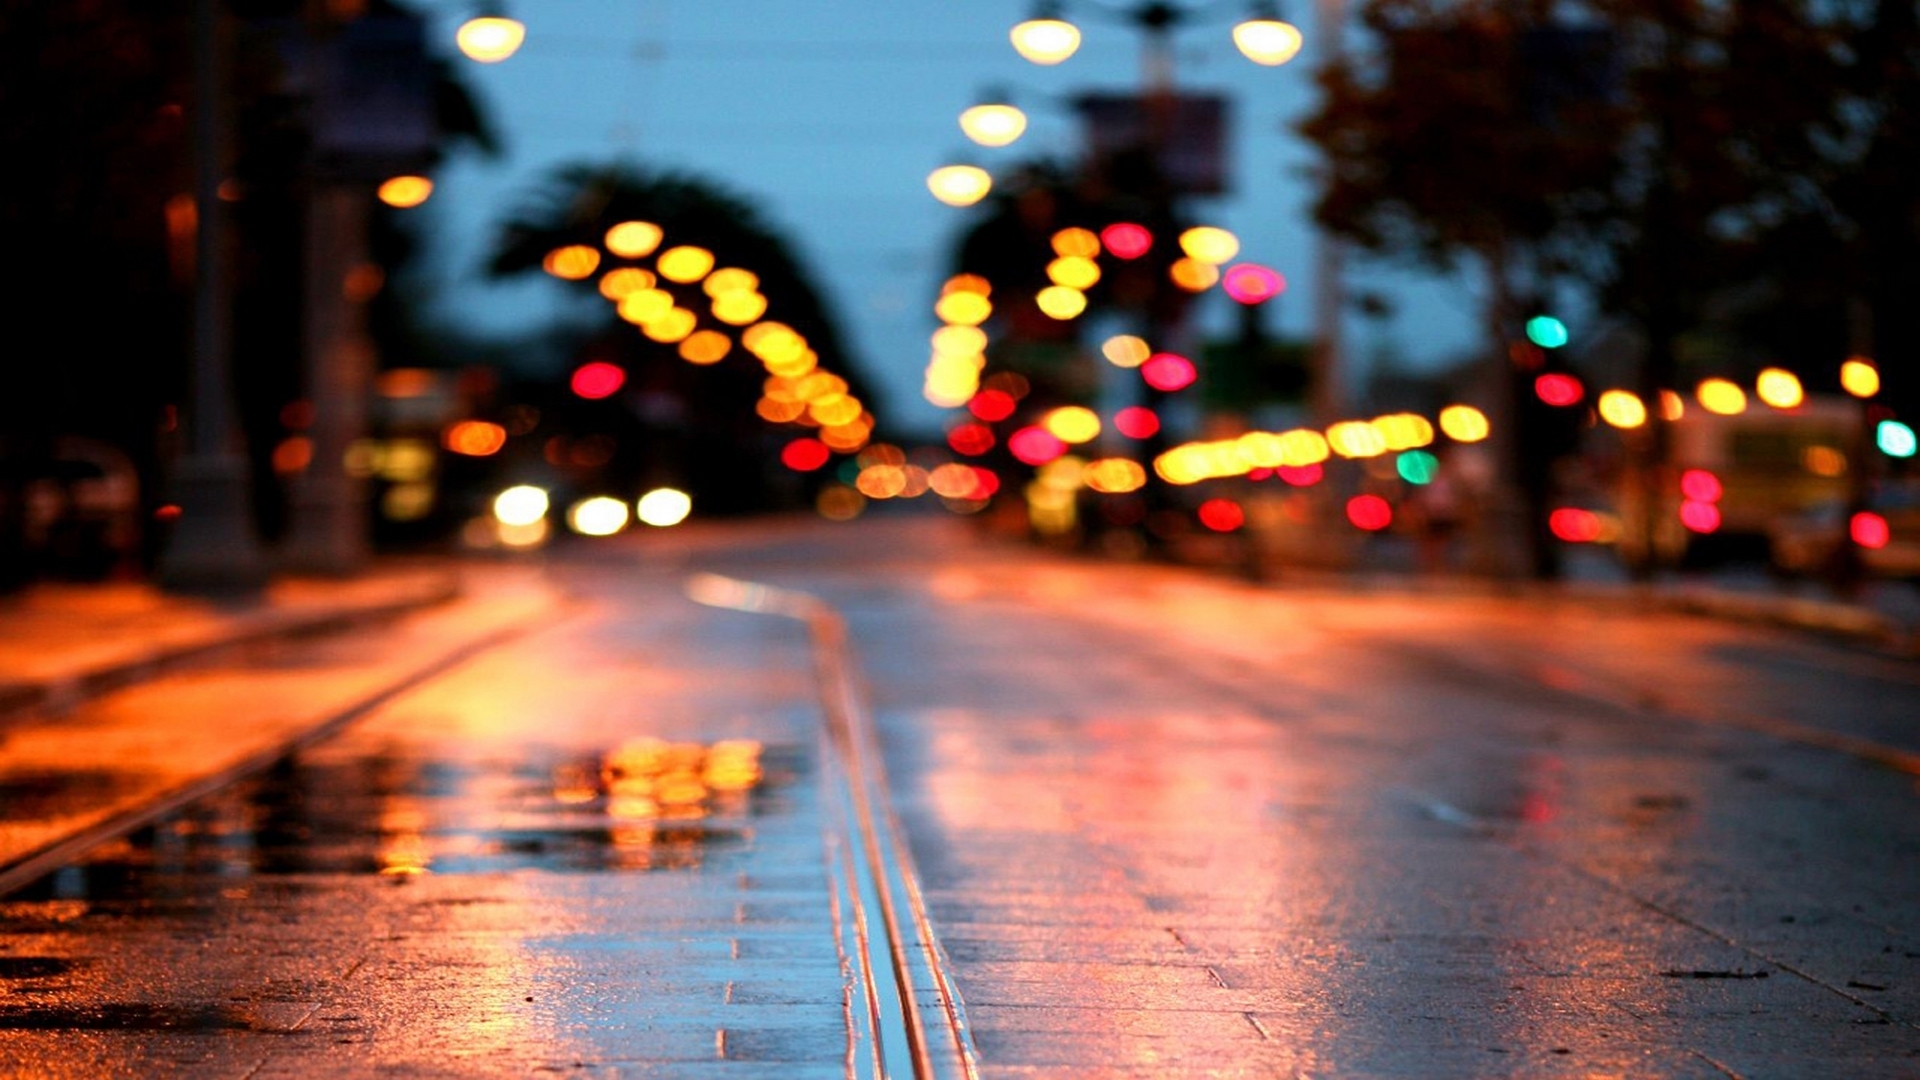 Download wallpaper road, wet, macro, the city, lights, glare, rain,  Wallpaper, street, puddle, lights, 1920x1080, section city in resolution  1920x1080